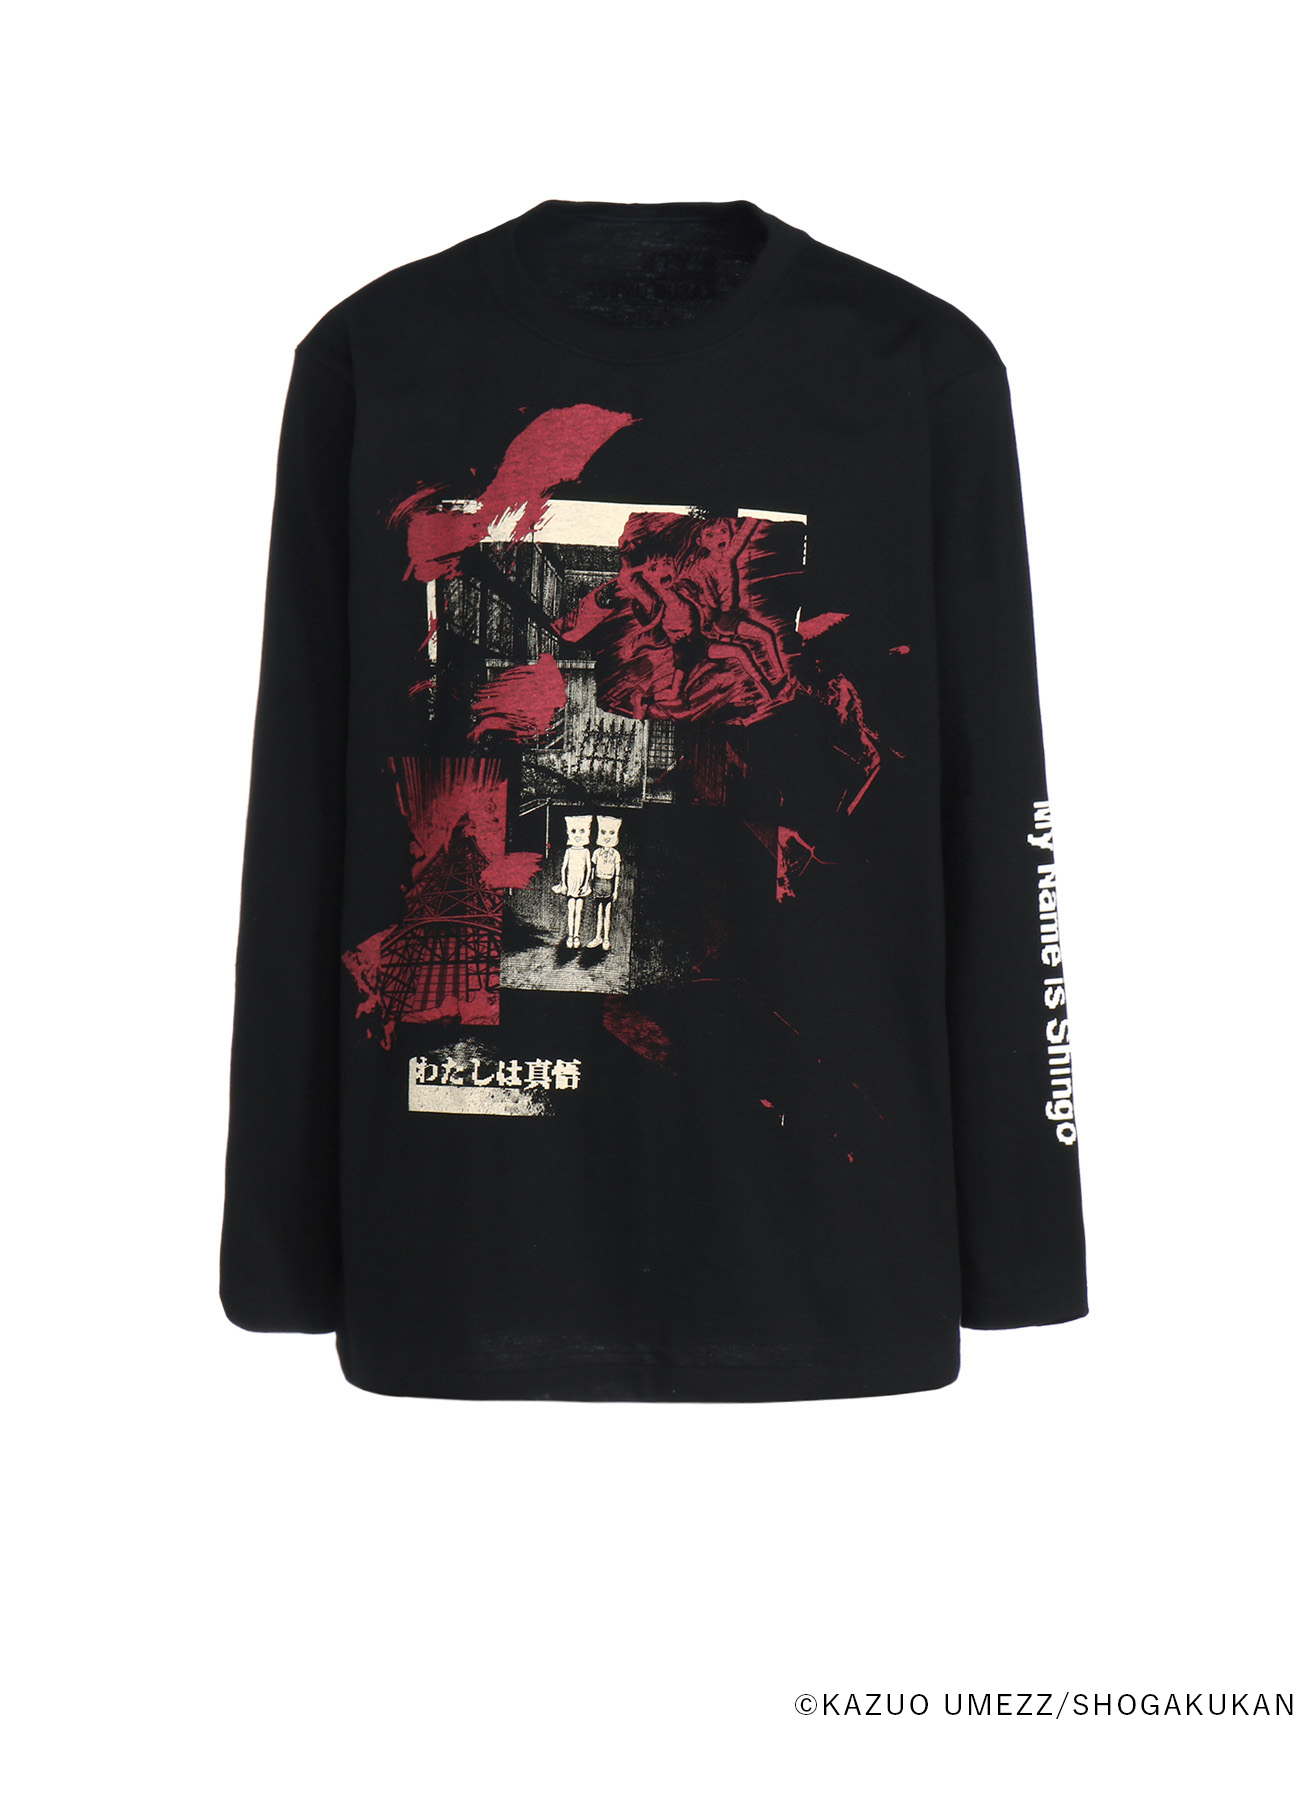 S'YTExKAZUO UMEZZ-MY NAME IS SHINGO- C/JERSEY LONG-SLEEVED T-SHIRT PRINTED WITH COLLAGE OF COMICS COVER ART“Jump off the top of 333”